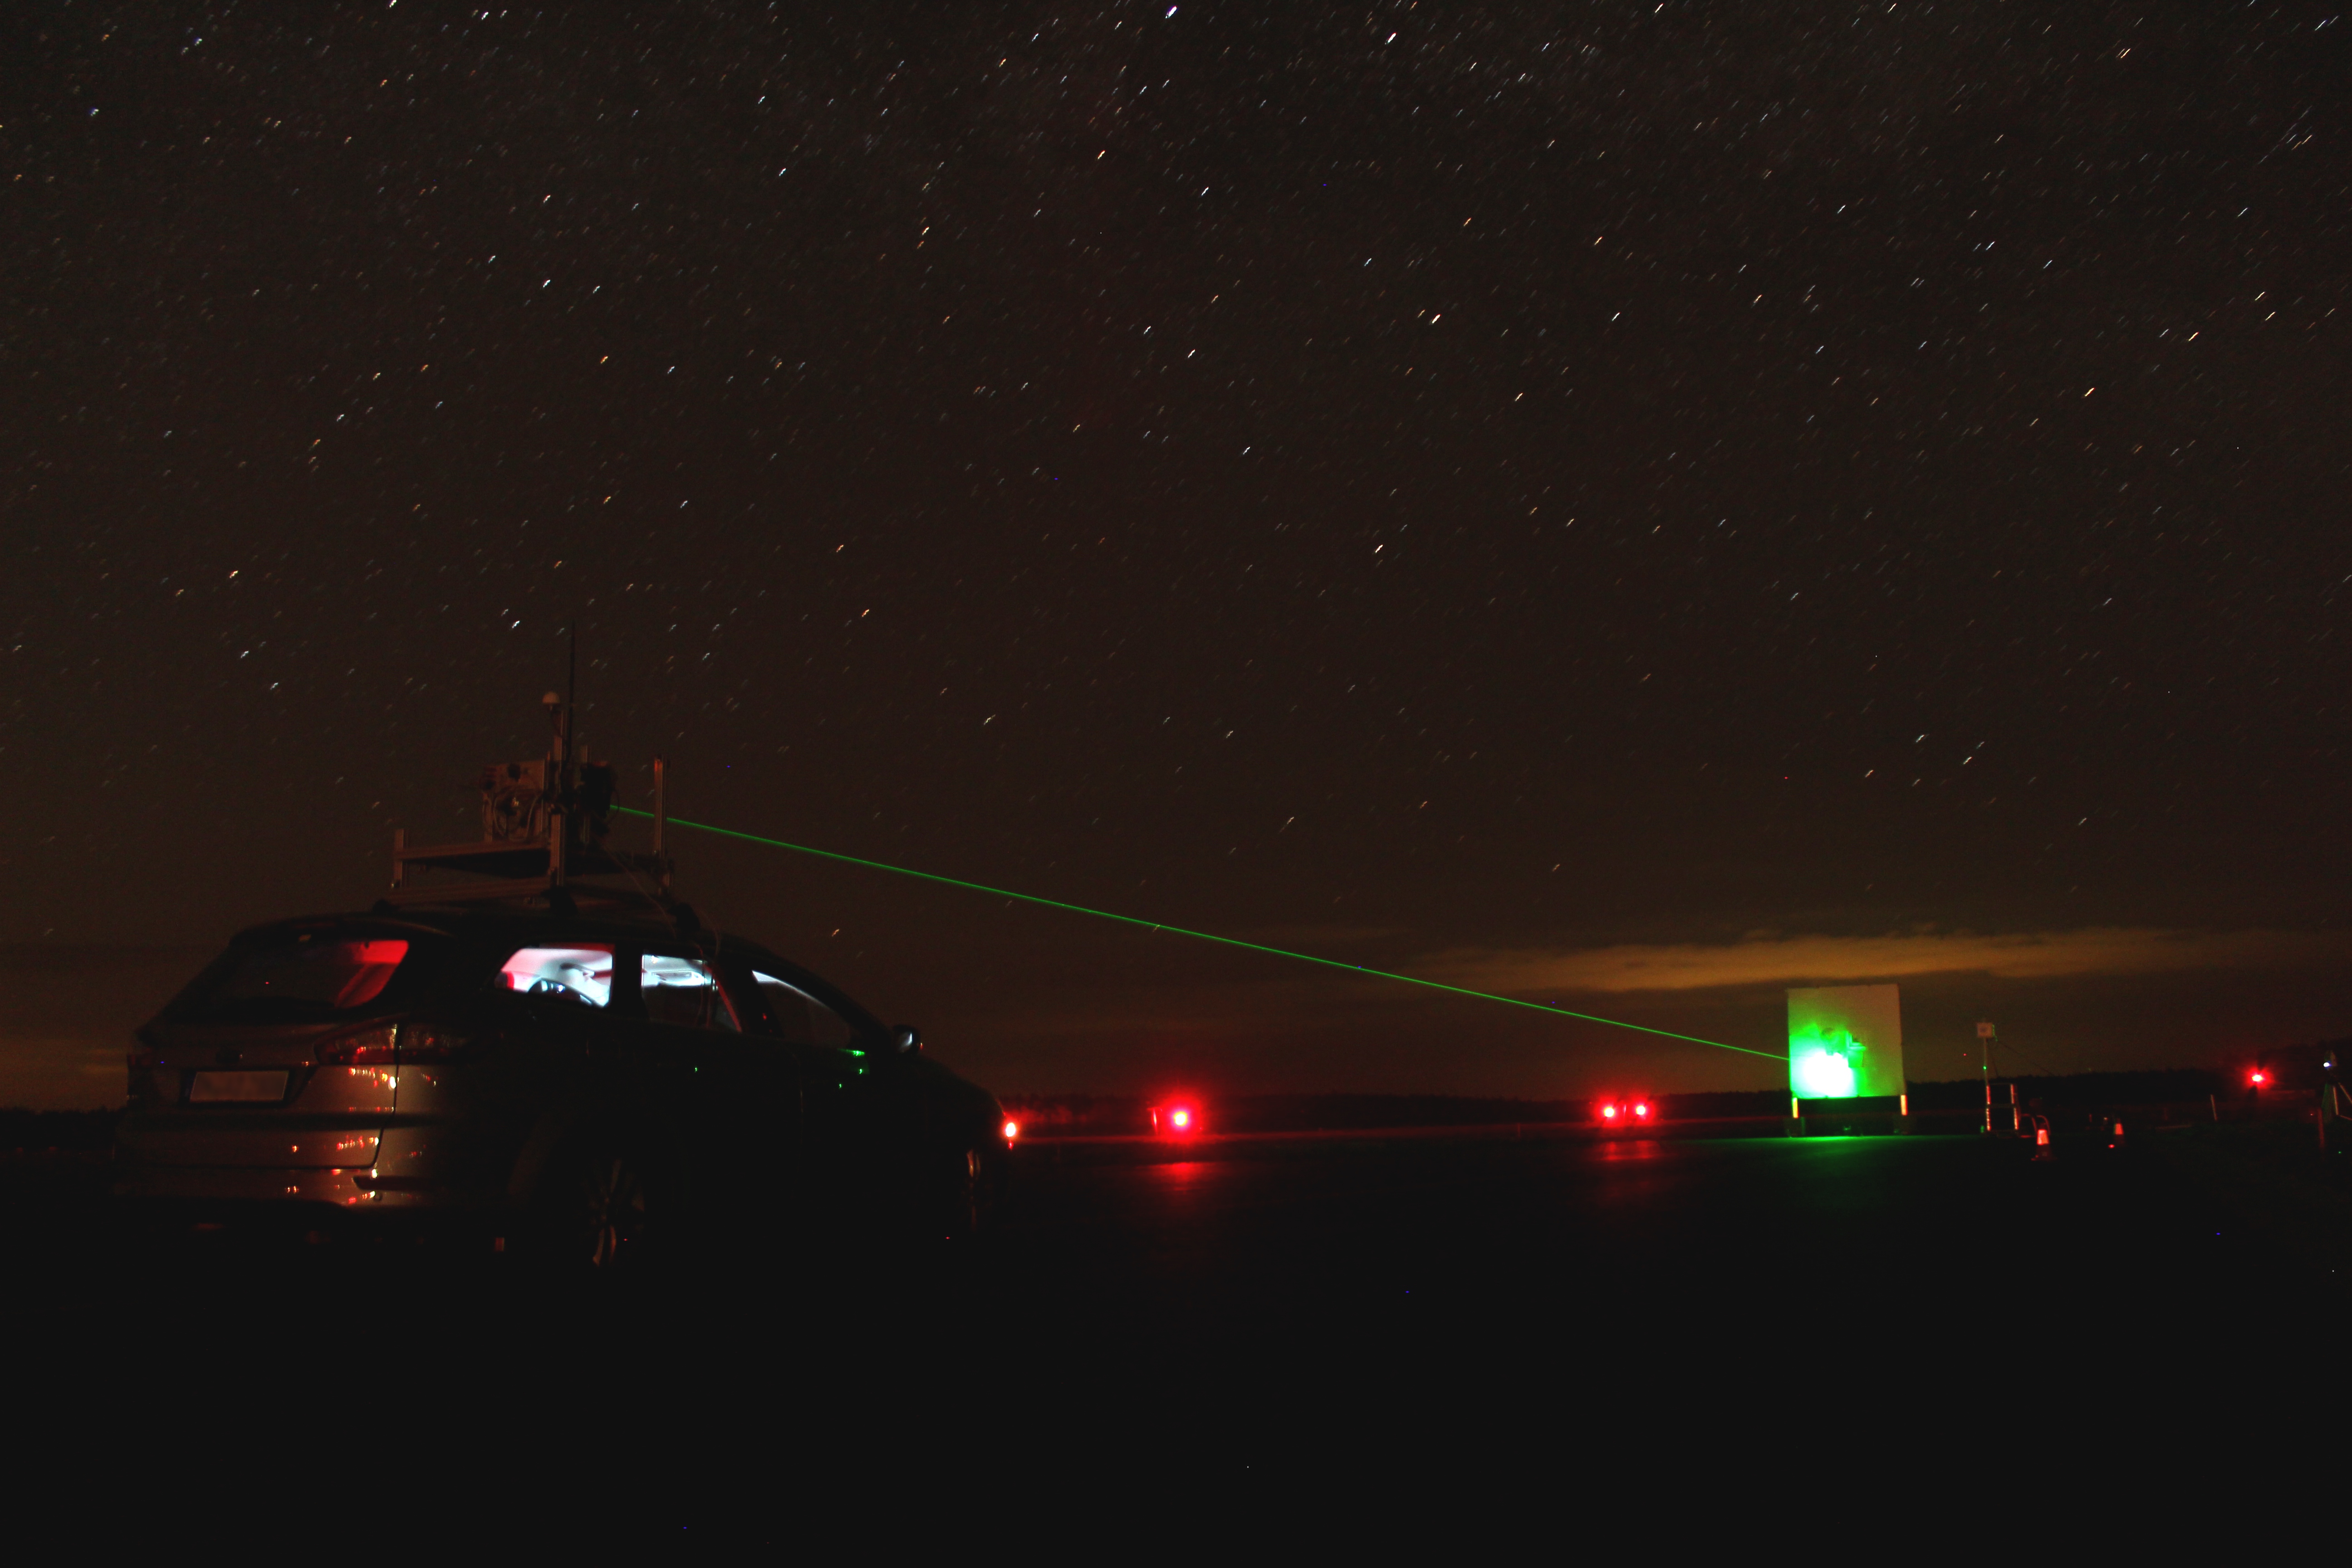 Mounting the technology on a car and speeding down an airport runway towards a target is helping researchers test new space navigation systems. Image courtesy of SINPLEX. 